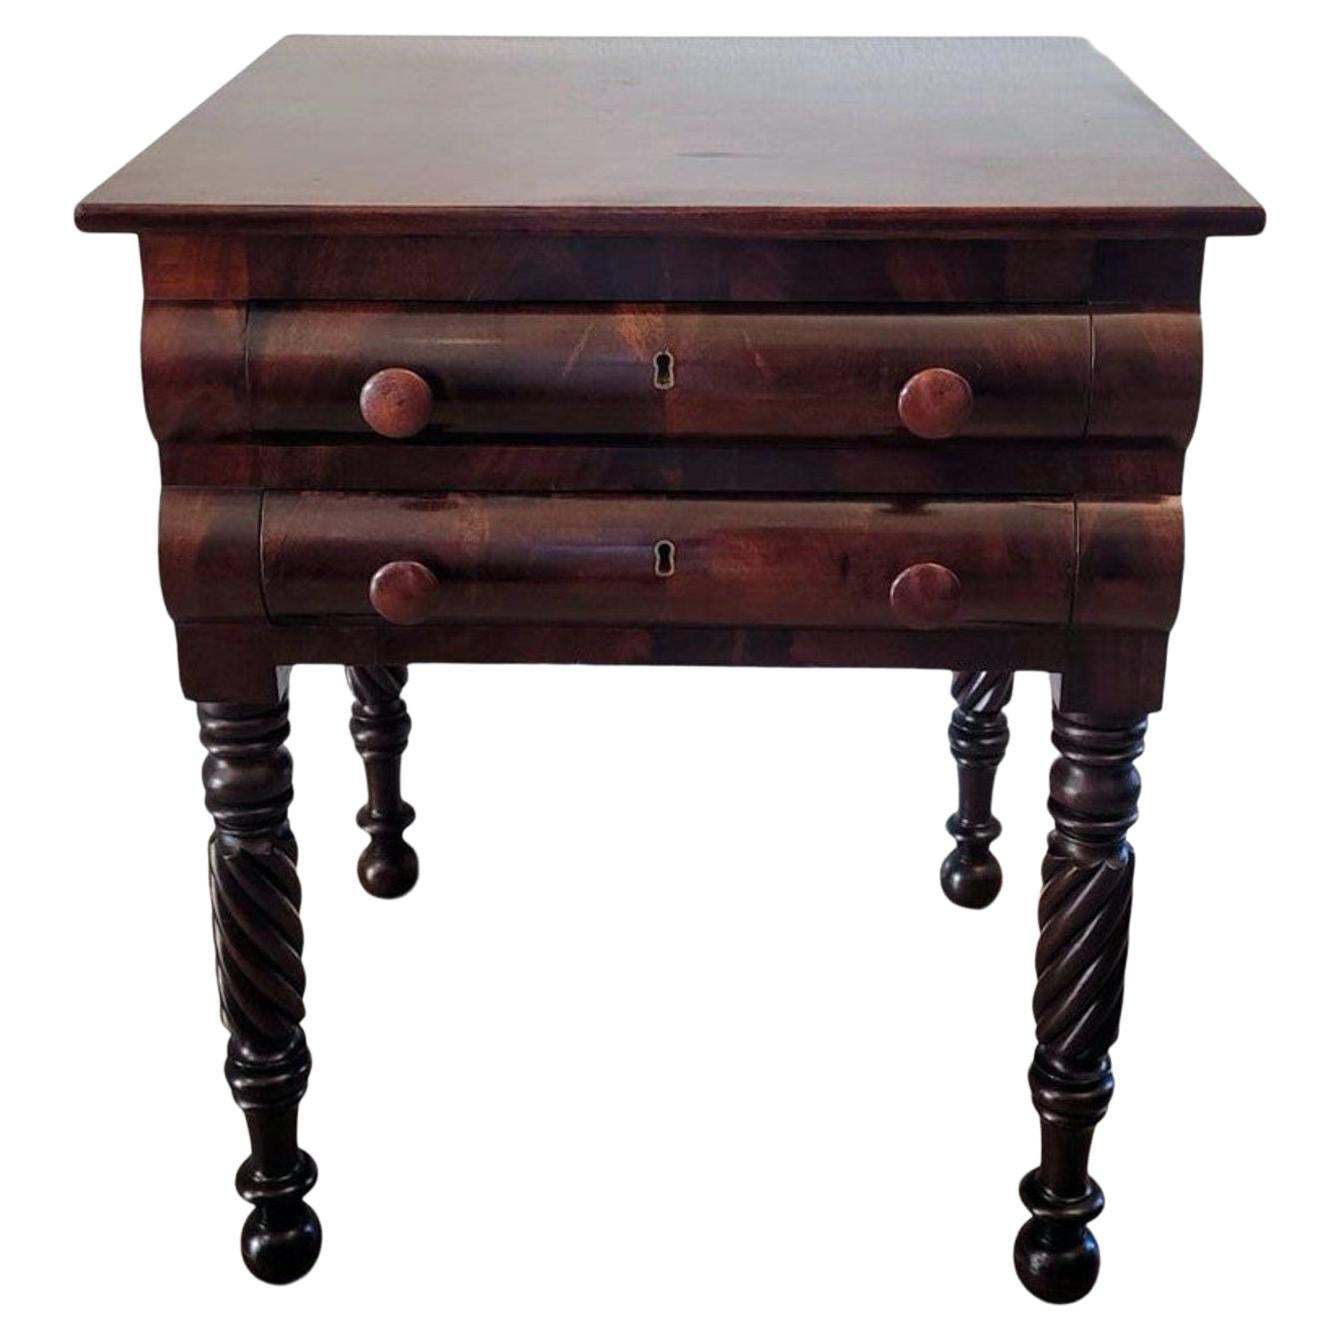 Early 19th Century American Federal Period Work Table For Sale